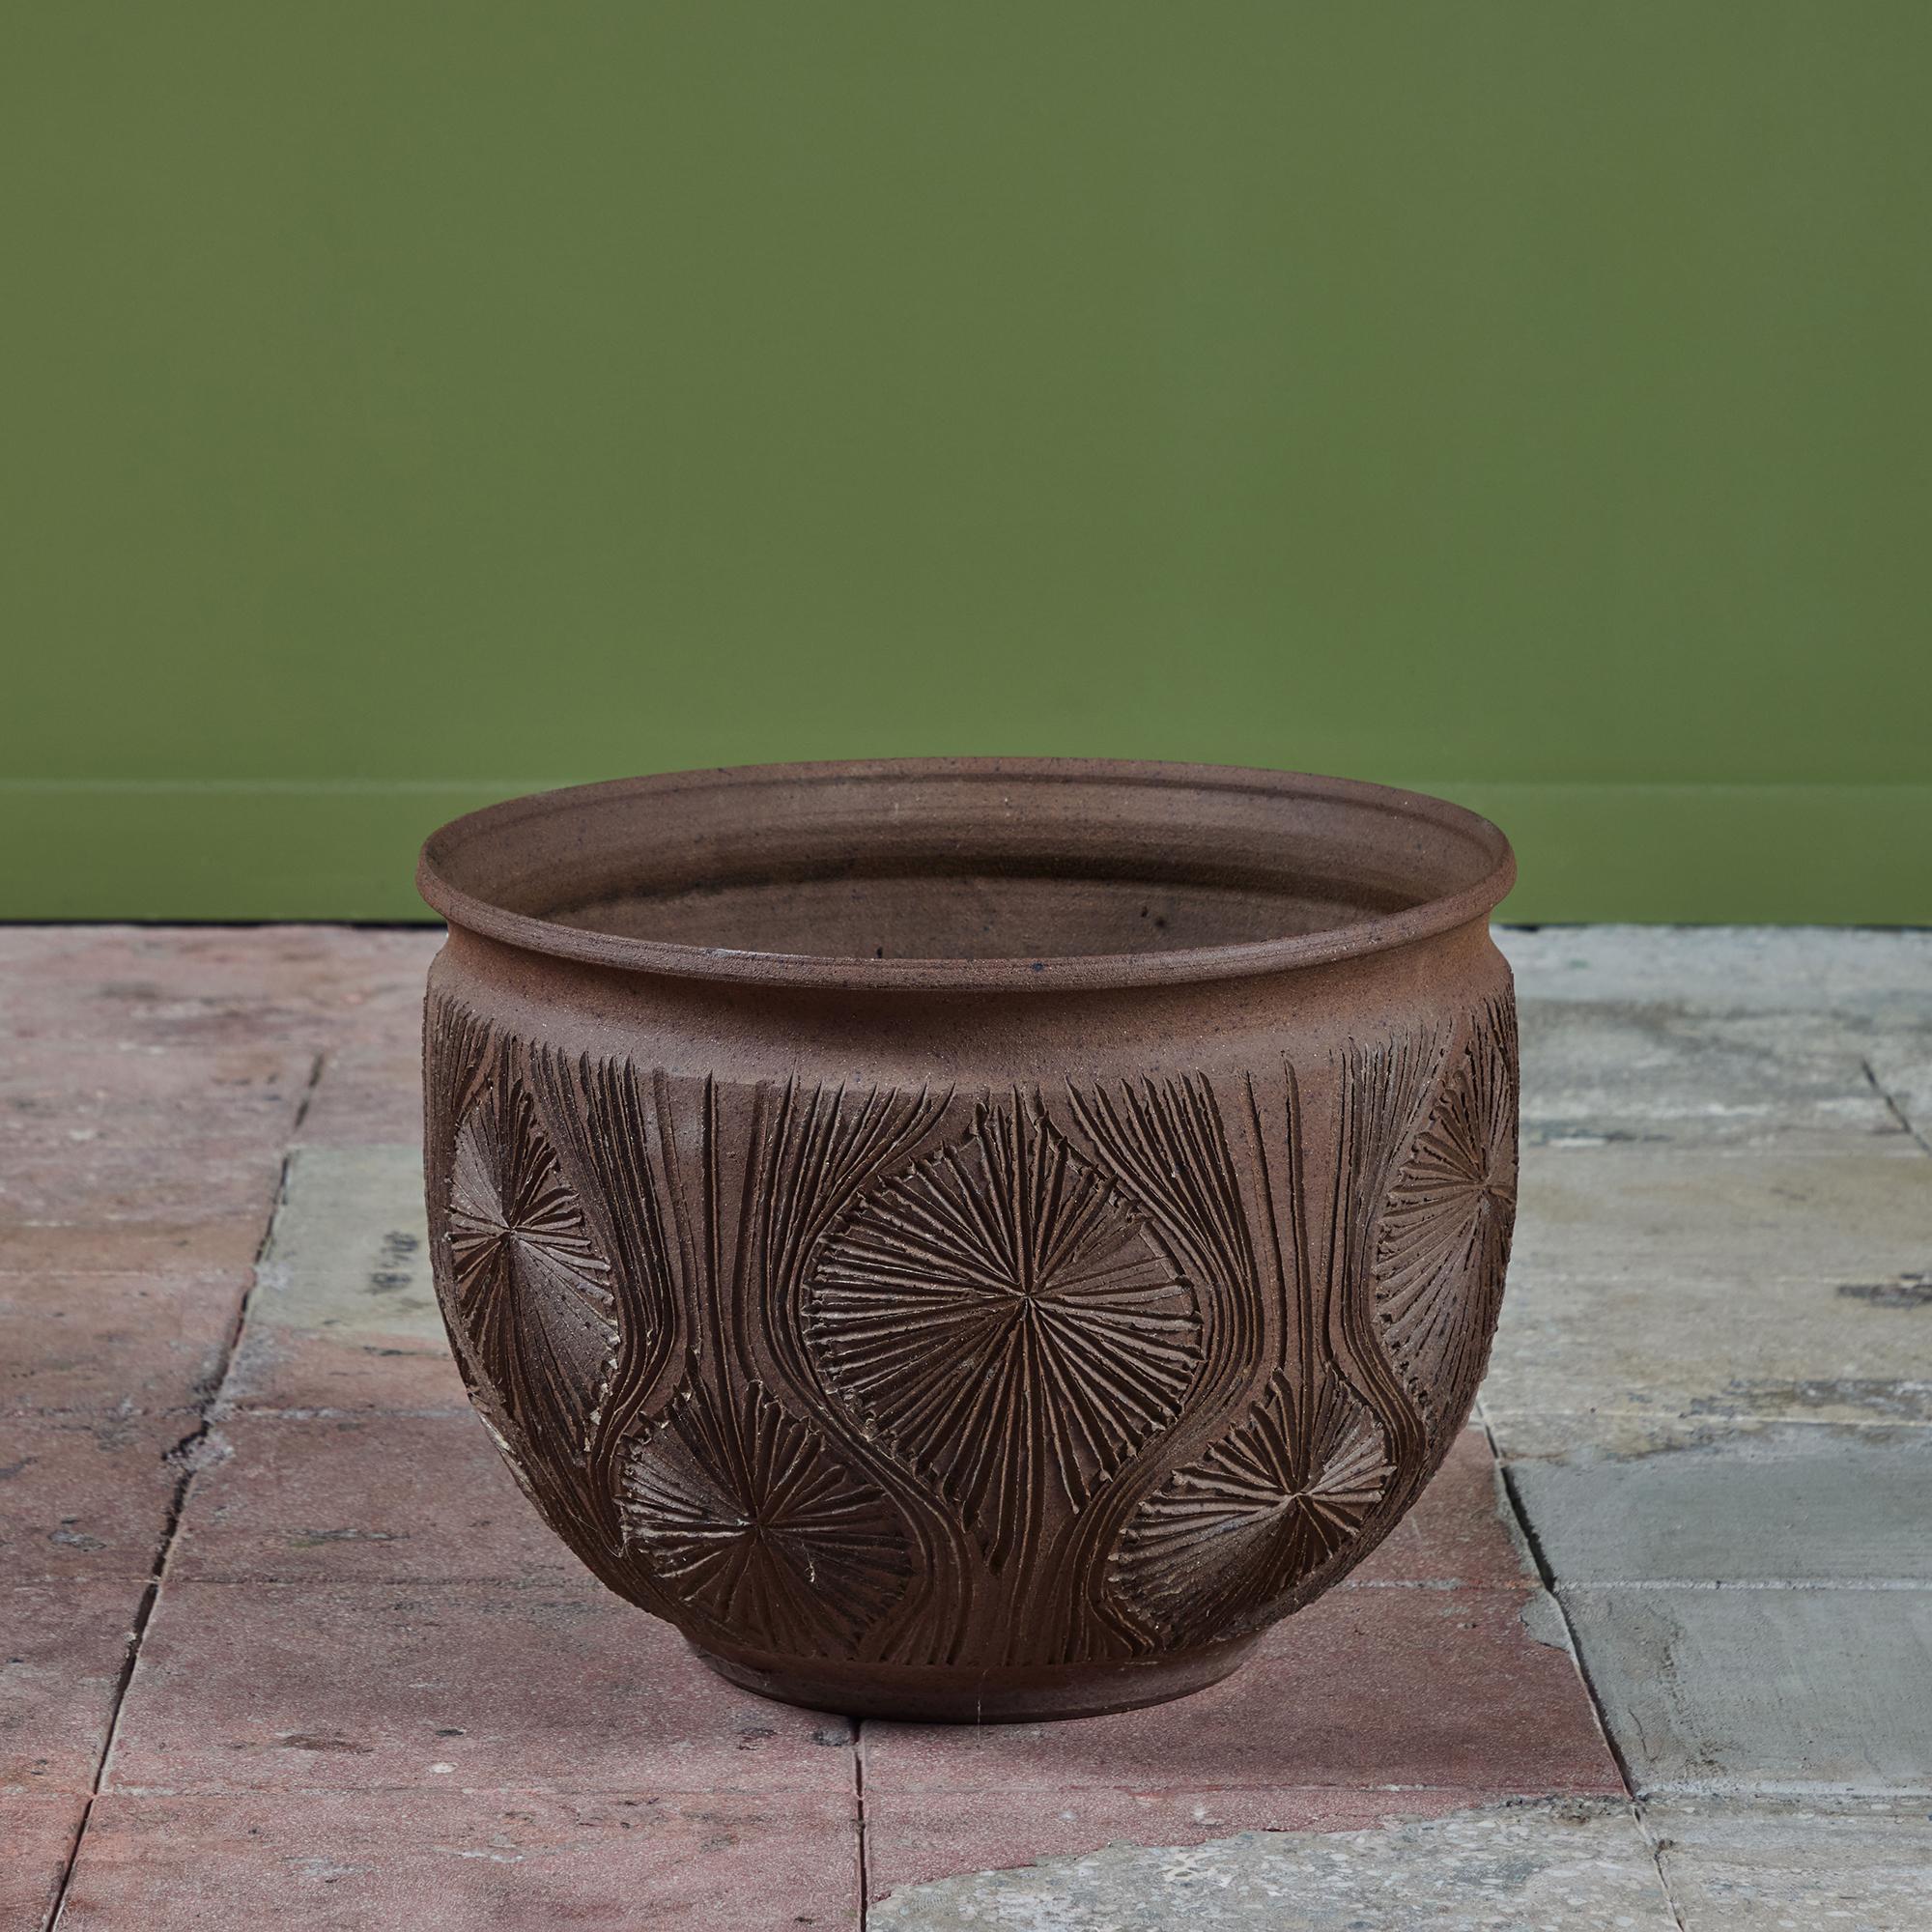 Natural warm brown stoneware planter, c.1970, USA, is a result of the collaboration between David Cressey & Robert Maxwell to create the line Earthgender. This planter features a rounded lip and an incised all-over 